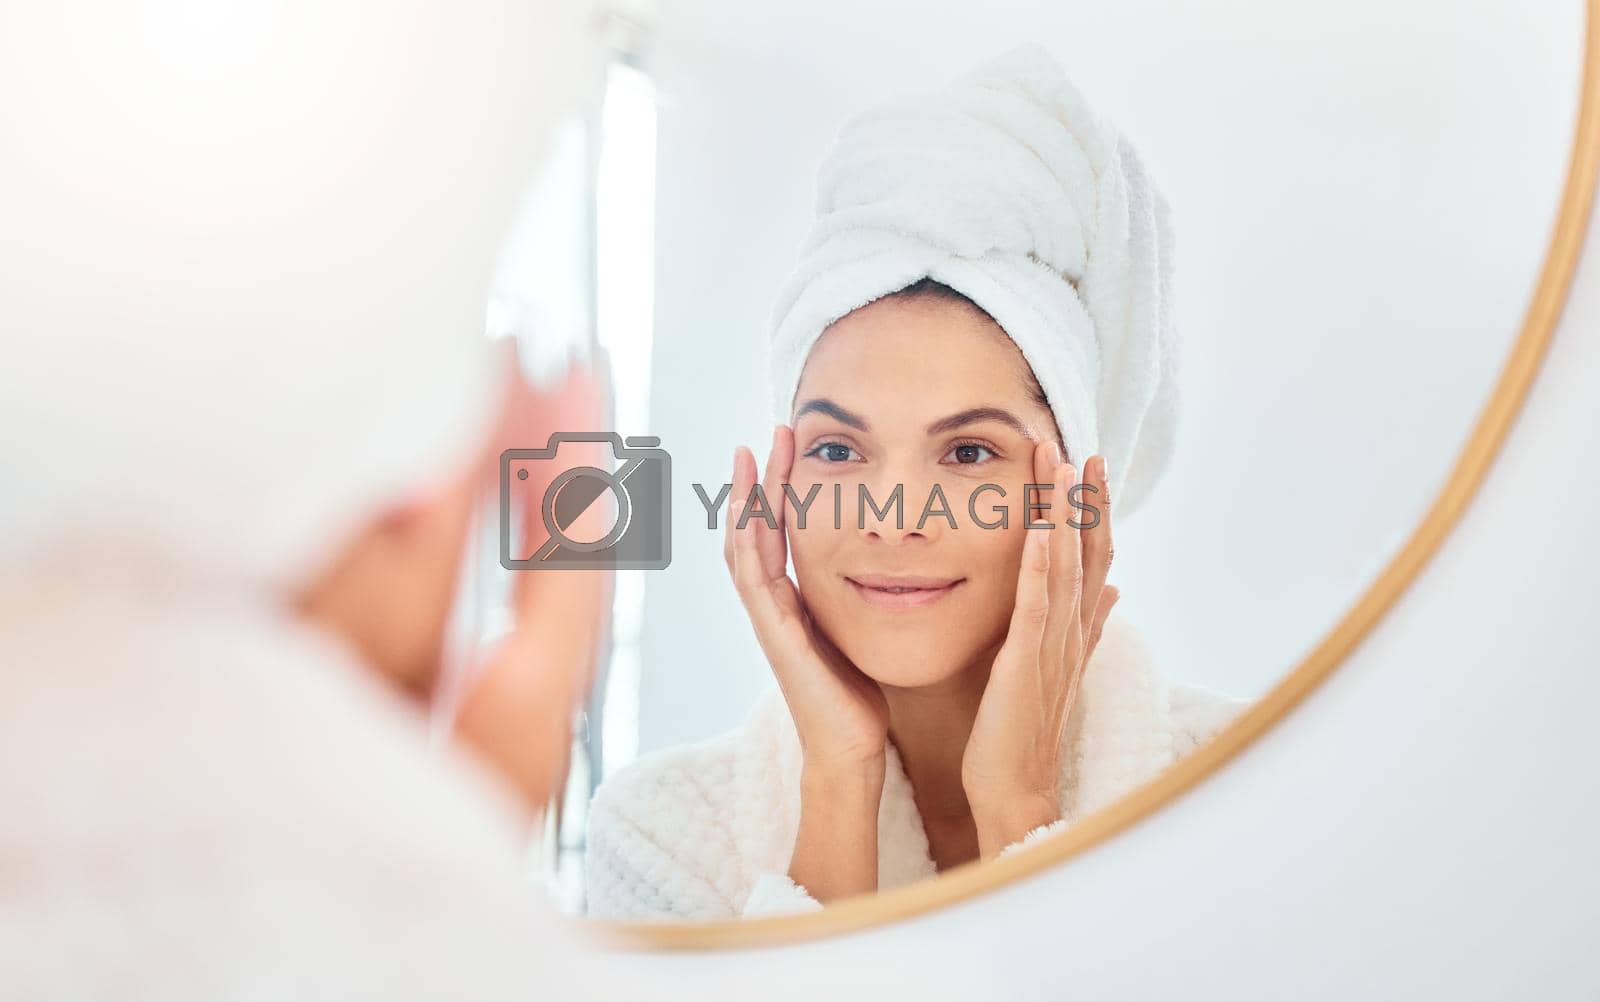 Royalty free image of Perhaps its time for some botox. a young woman analysing her reflection in her bathroom mirror. by YuriArcurs